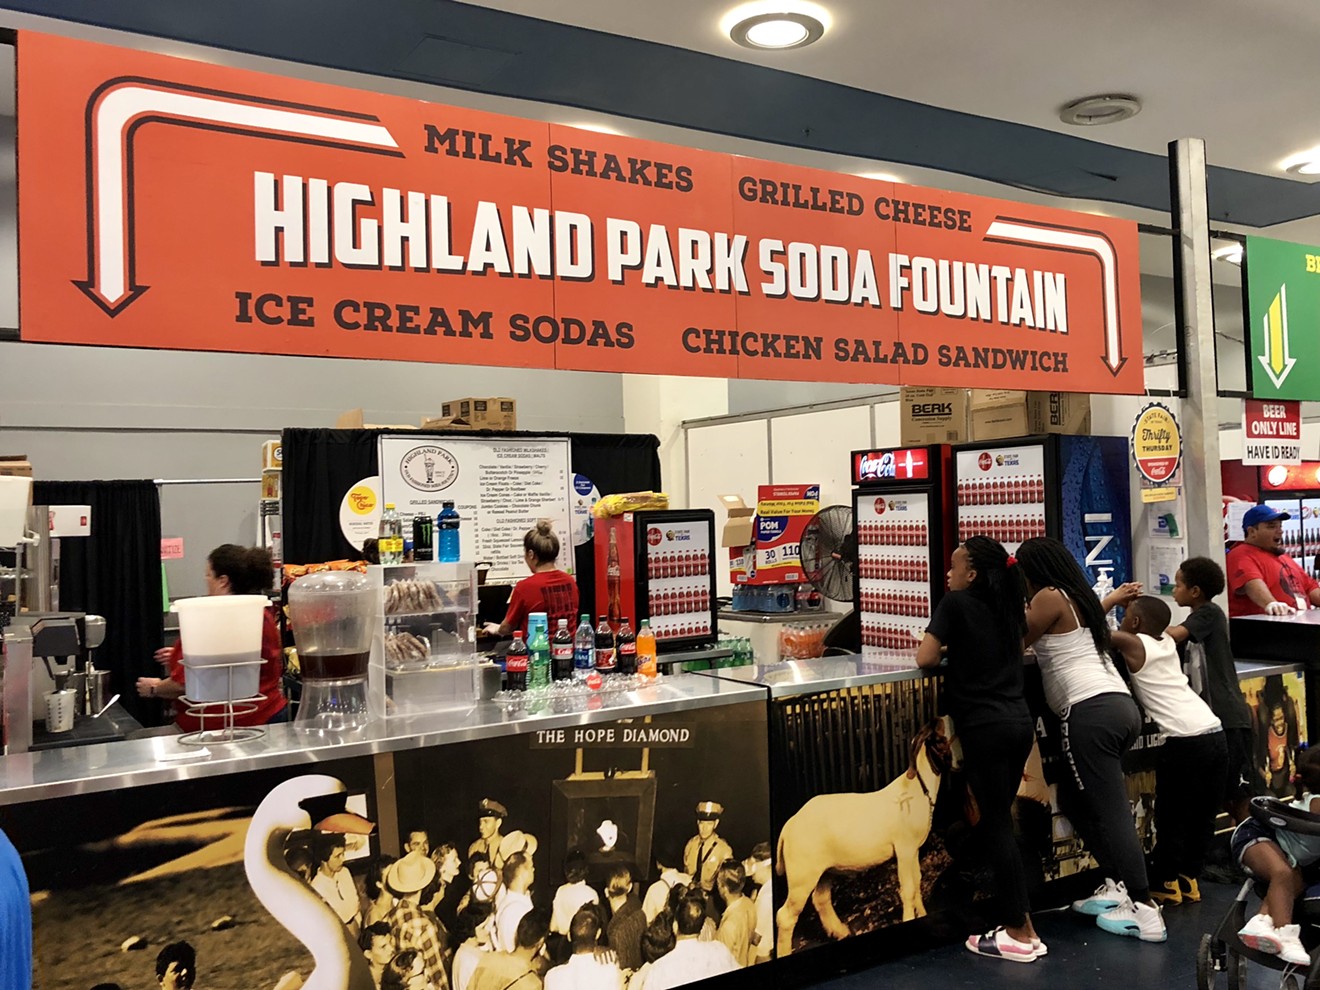 Miss the Highland Park Soda Fountain? You'll find it at the State Fair of Texas.